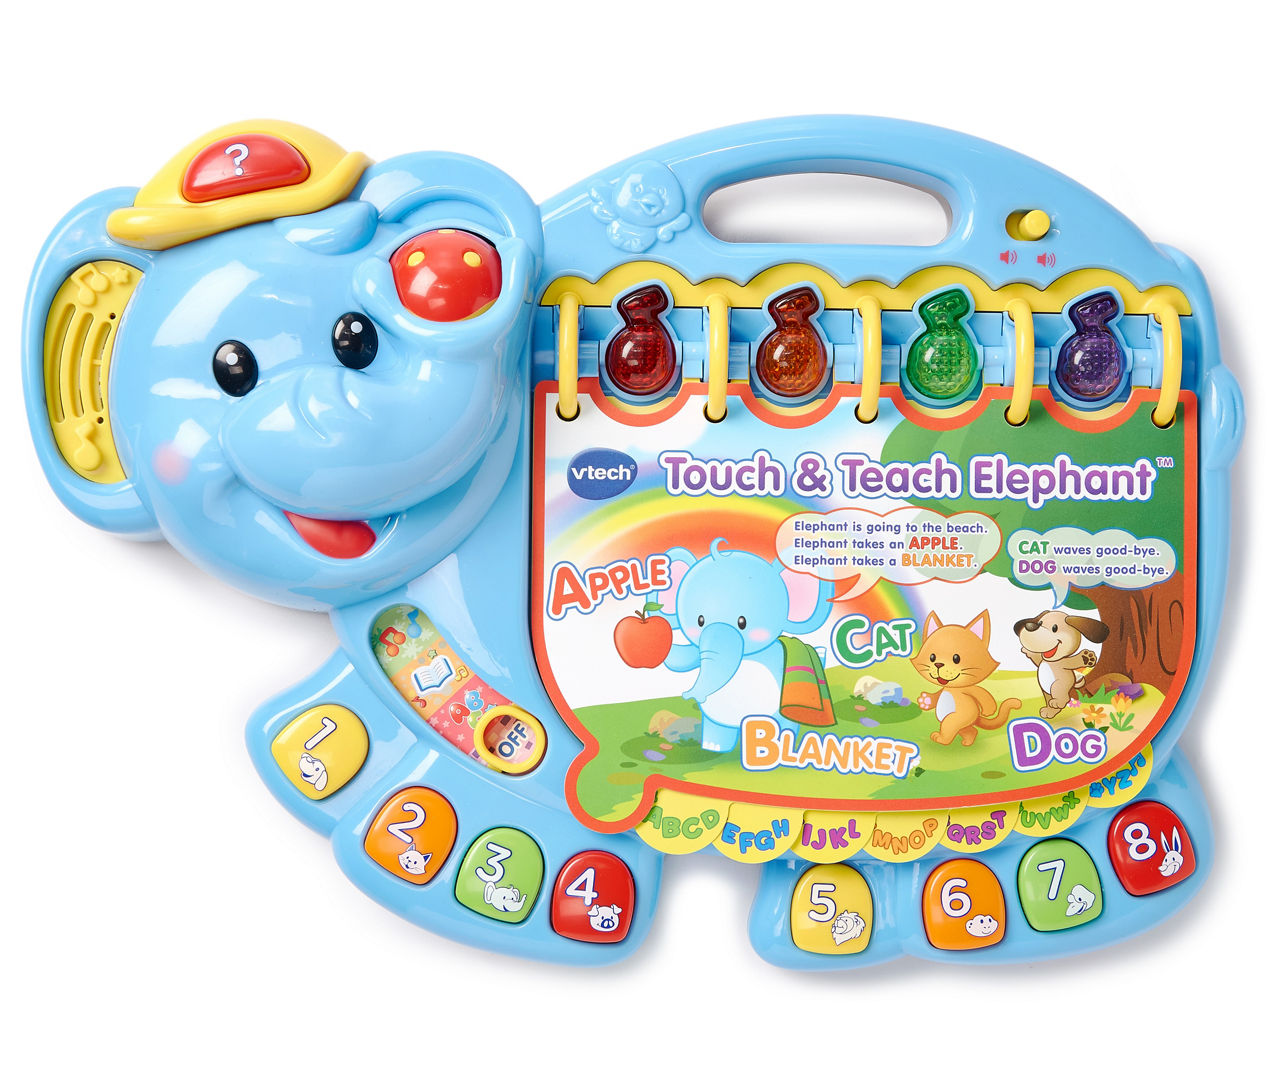 Details about   VTech Touch And Teach Elephant Book Kids Electronic Learning Toy Gift 